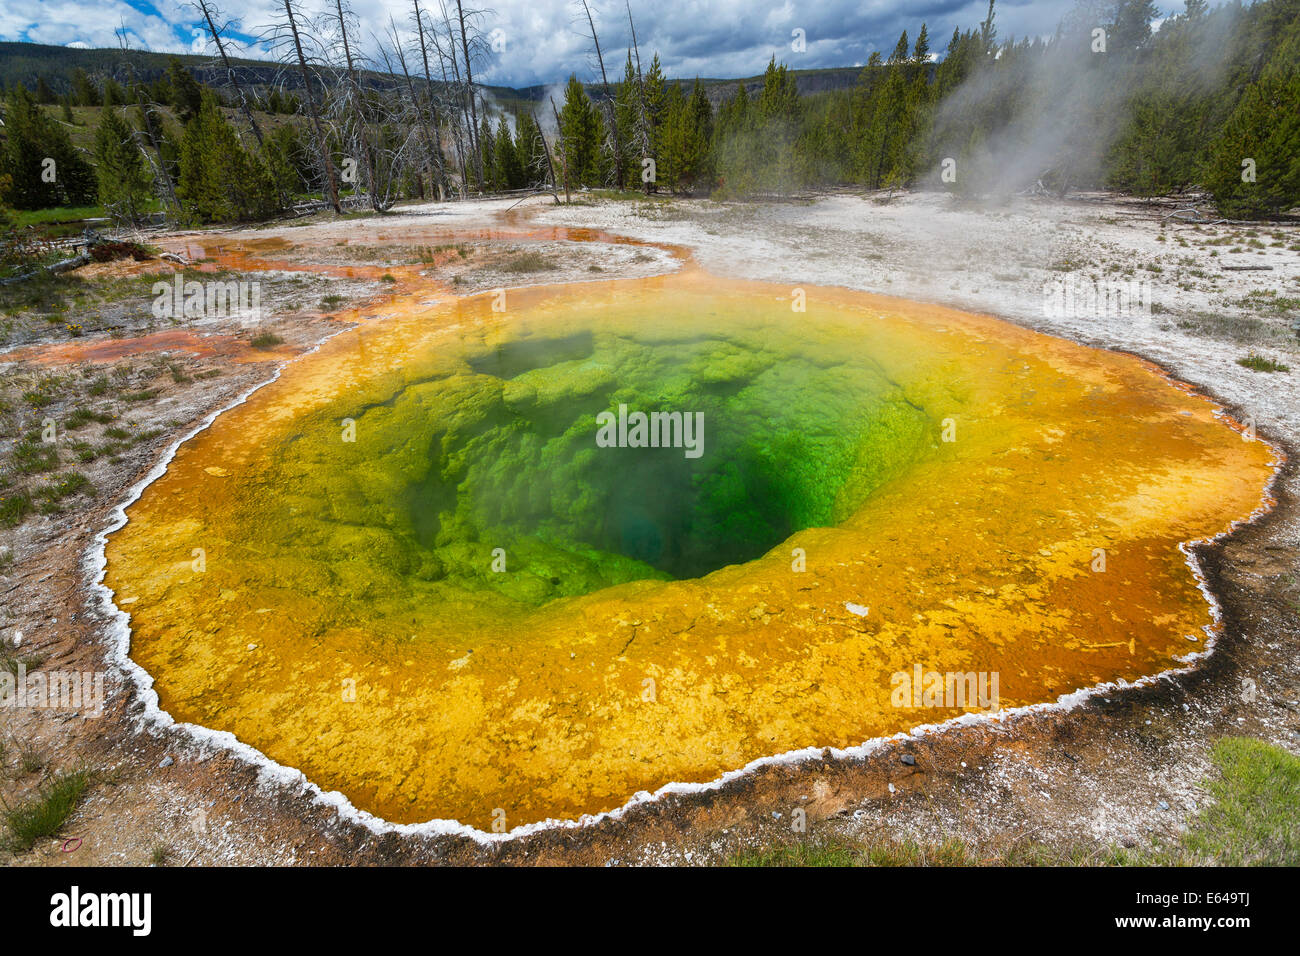 Morning Glory Pool, le Parc National de Yellowstone, Wyoming, USA Banque D'Images